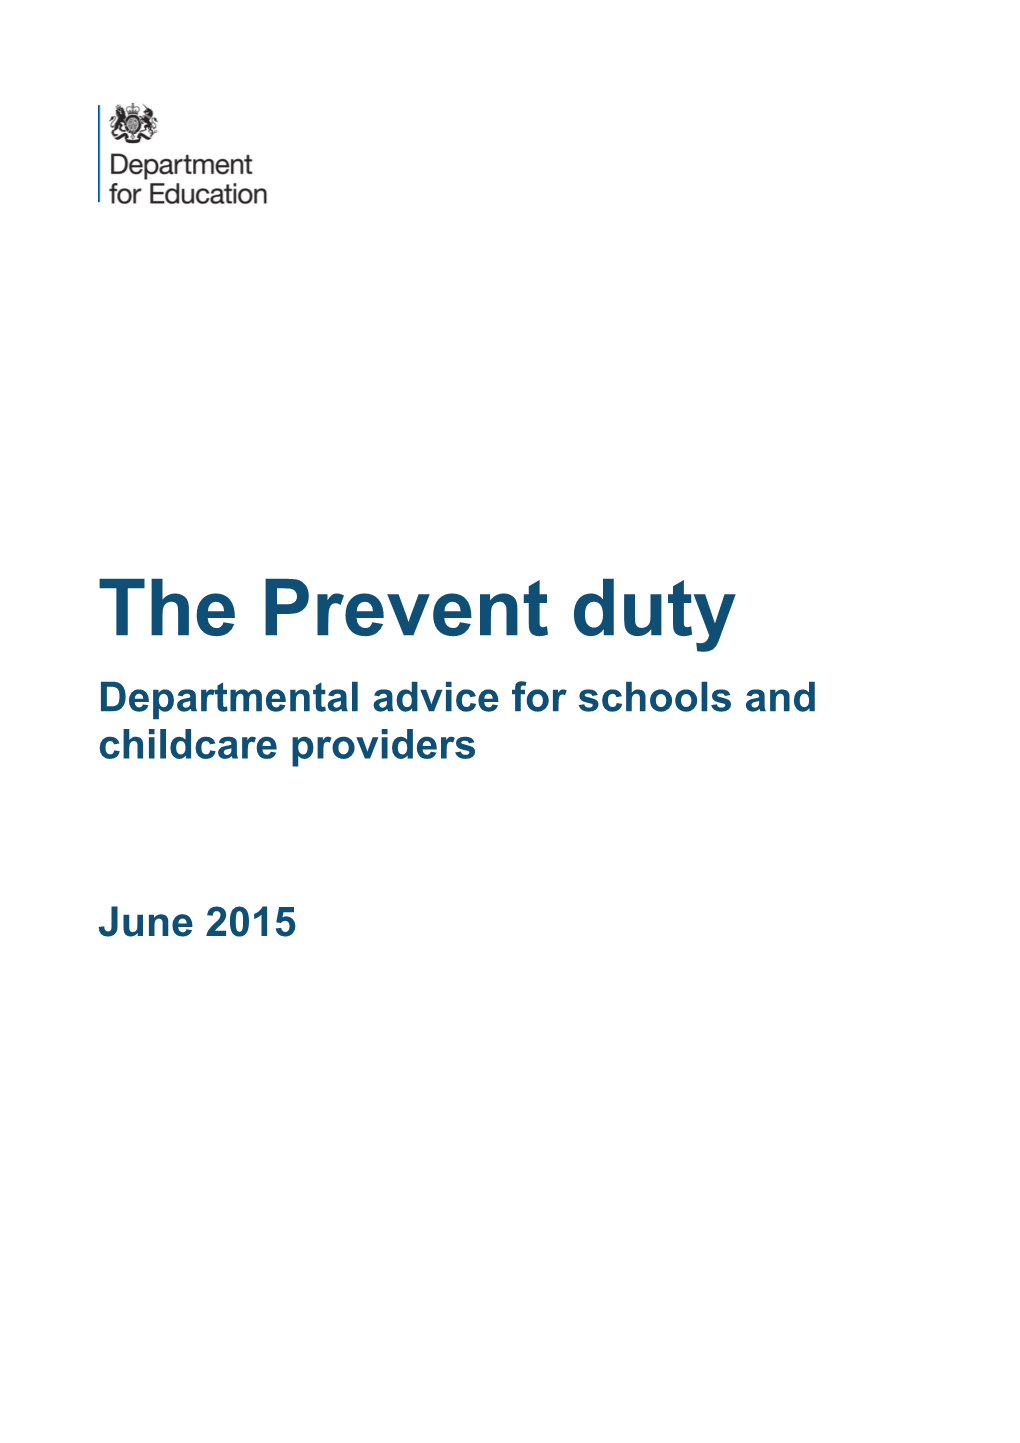 Departmental Advice for Schools and Childcare Providers